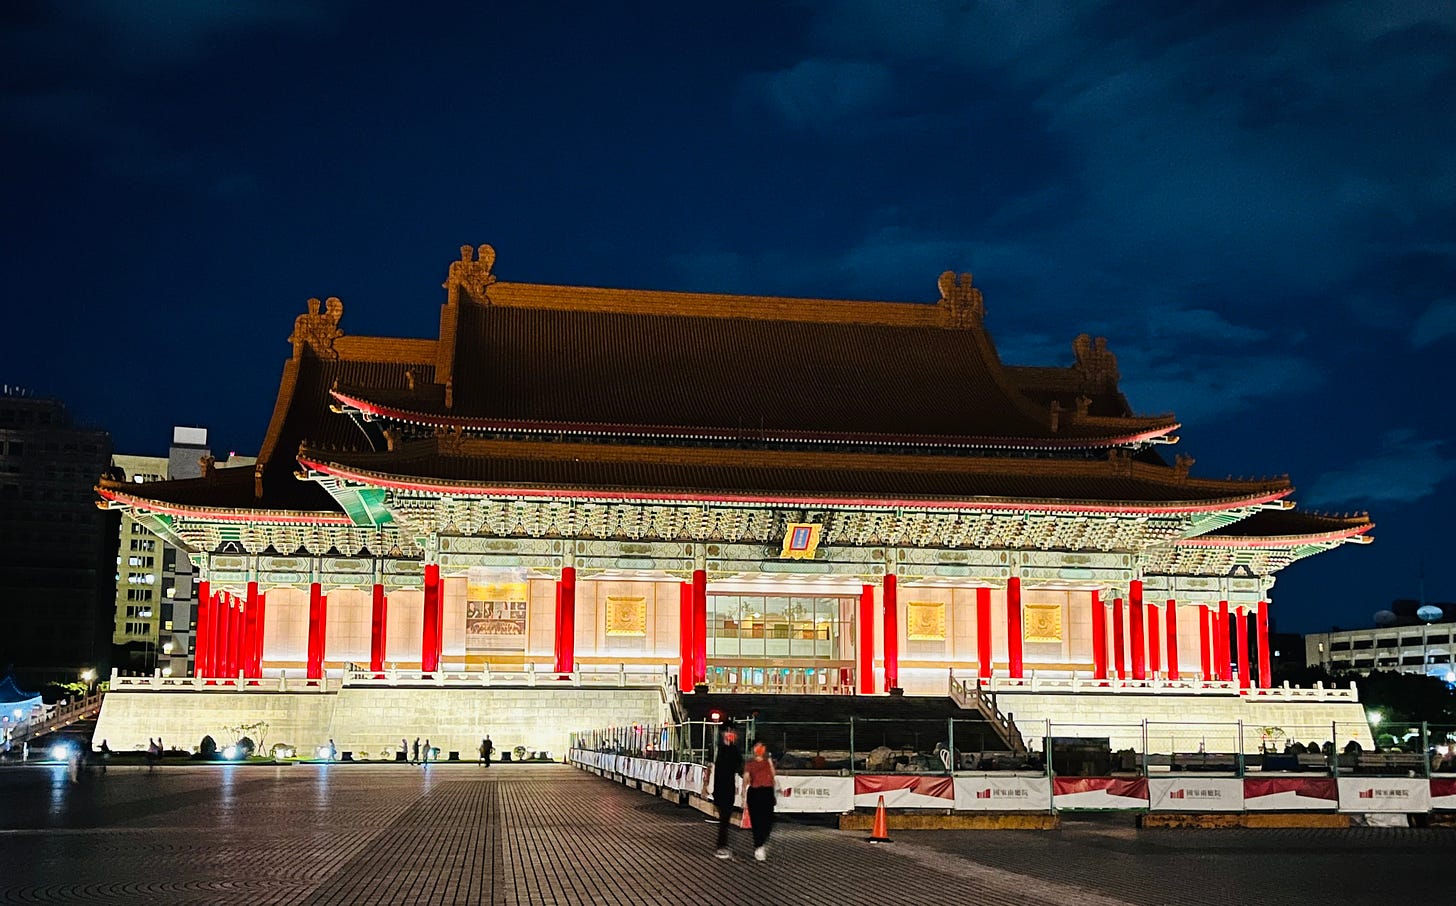 The exterior of Taiwan's National Concert Hall in Taipei at night. The building is illuminated to show off bright red columns on the entrance level underneath the upturned eaves of a yellow-tiled roof. In the square in front of the concert hall, a large area is fenced off for maintenance.